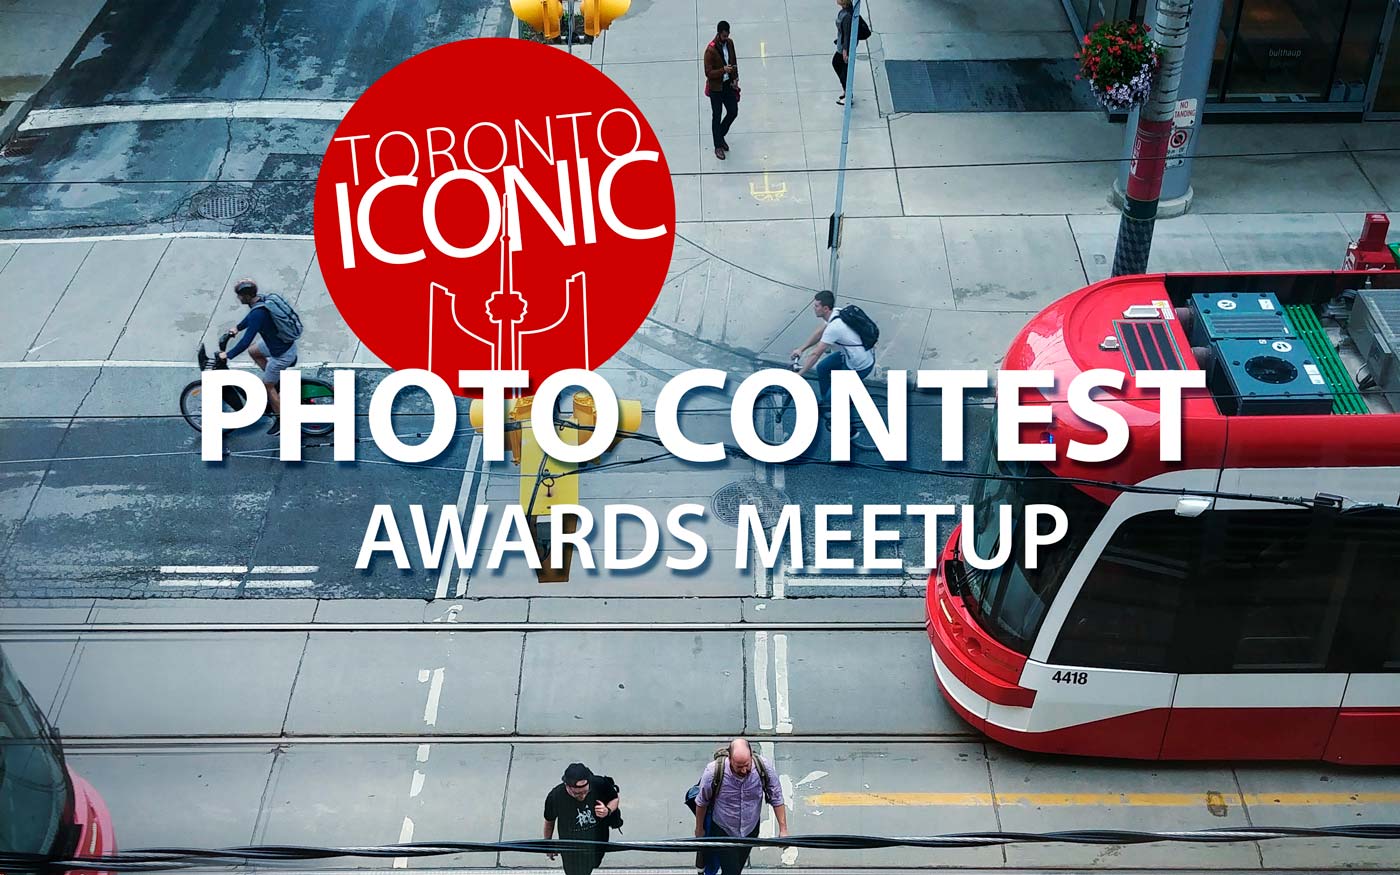 Iconic Toronto Photo Contest awards meetup and photo walk on December 11